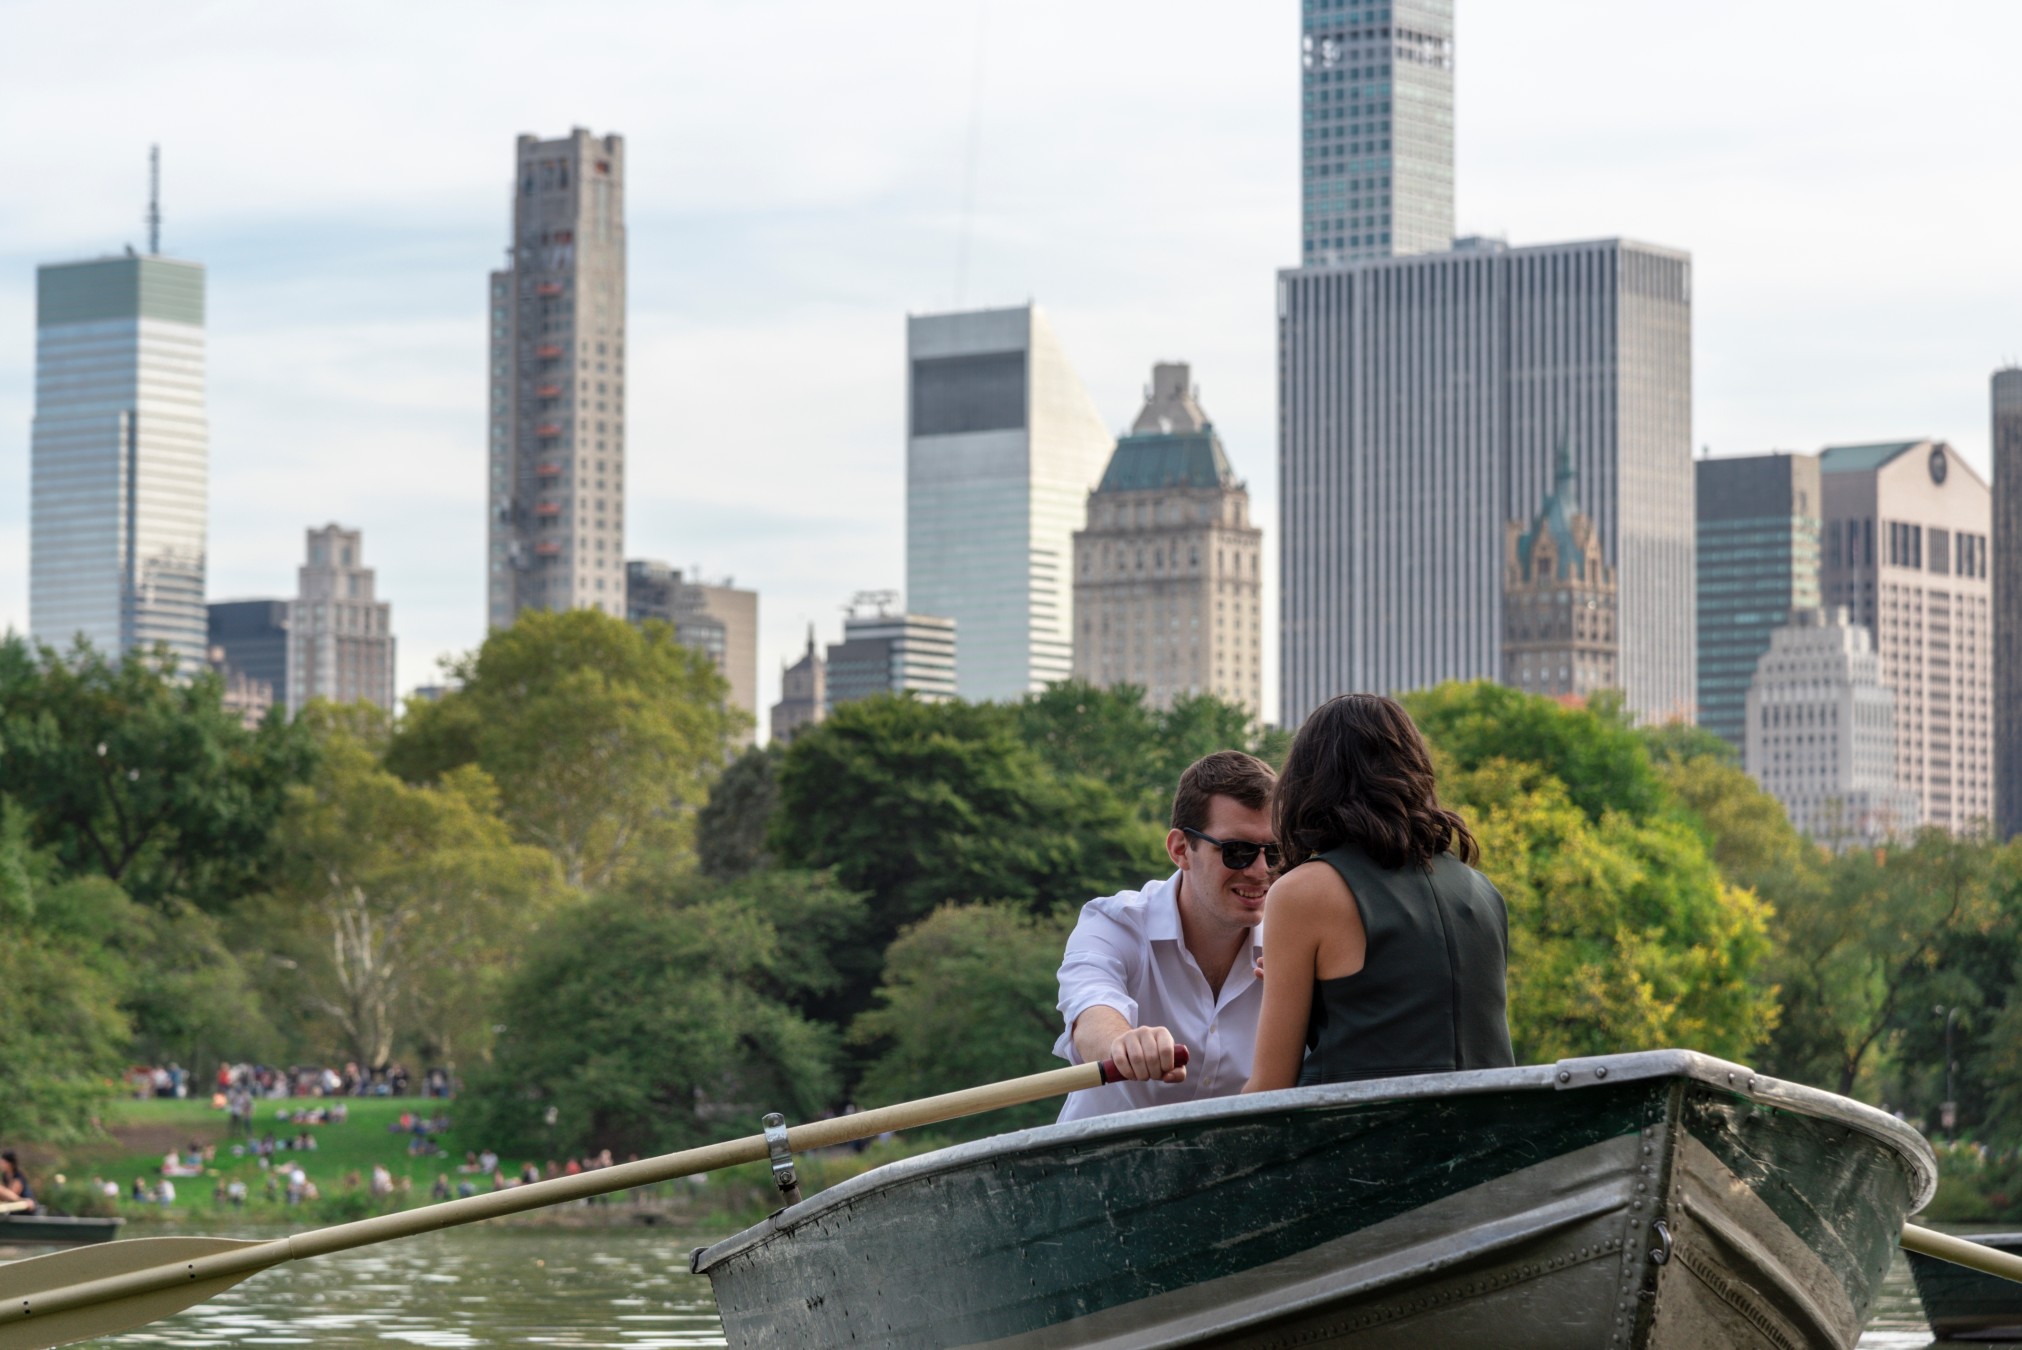 The most romantic and charming places for couples to visit in New York City, including parks